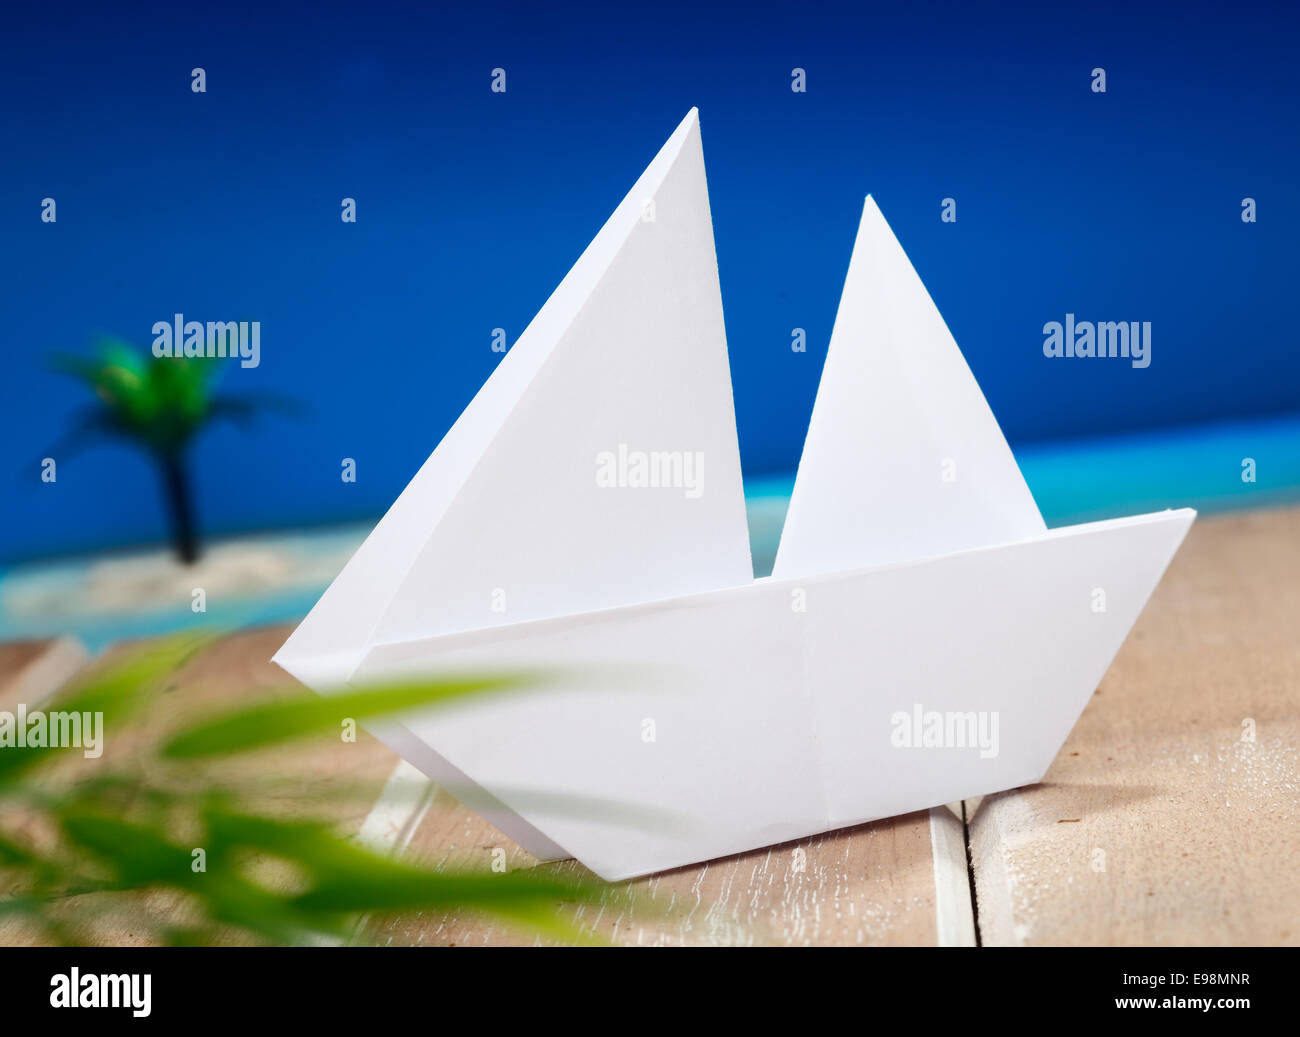 a paper boat on a wooden table in front of a beach with a palm on an idyllic place. Maybe for holiday vacation or wellness concepts Stock Photo